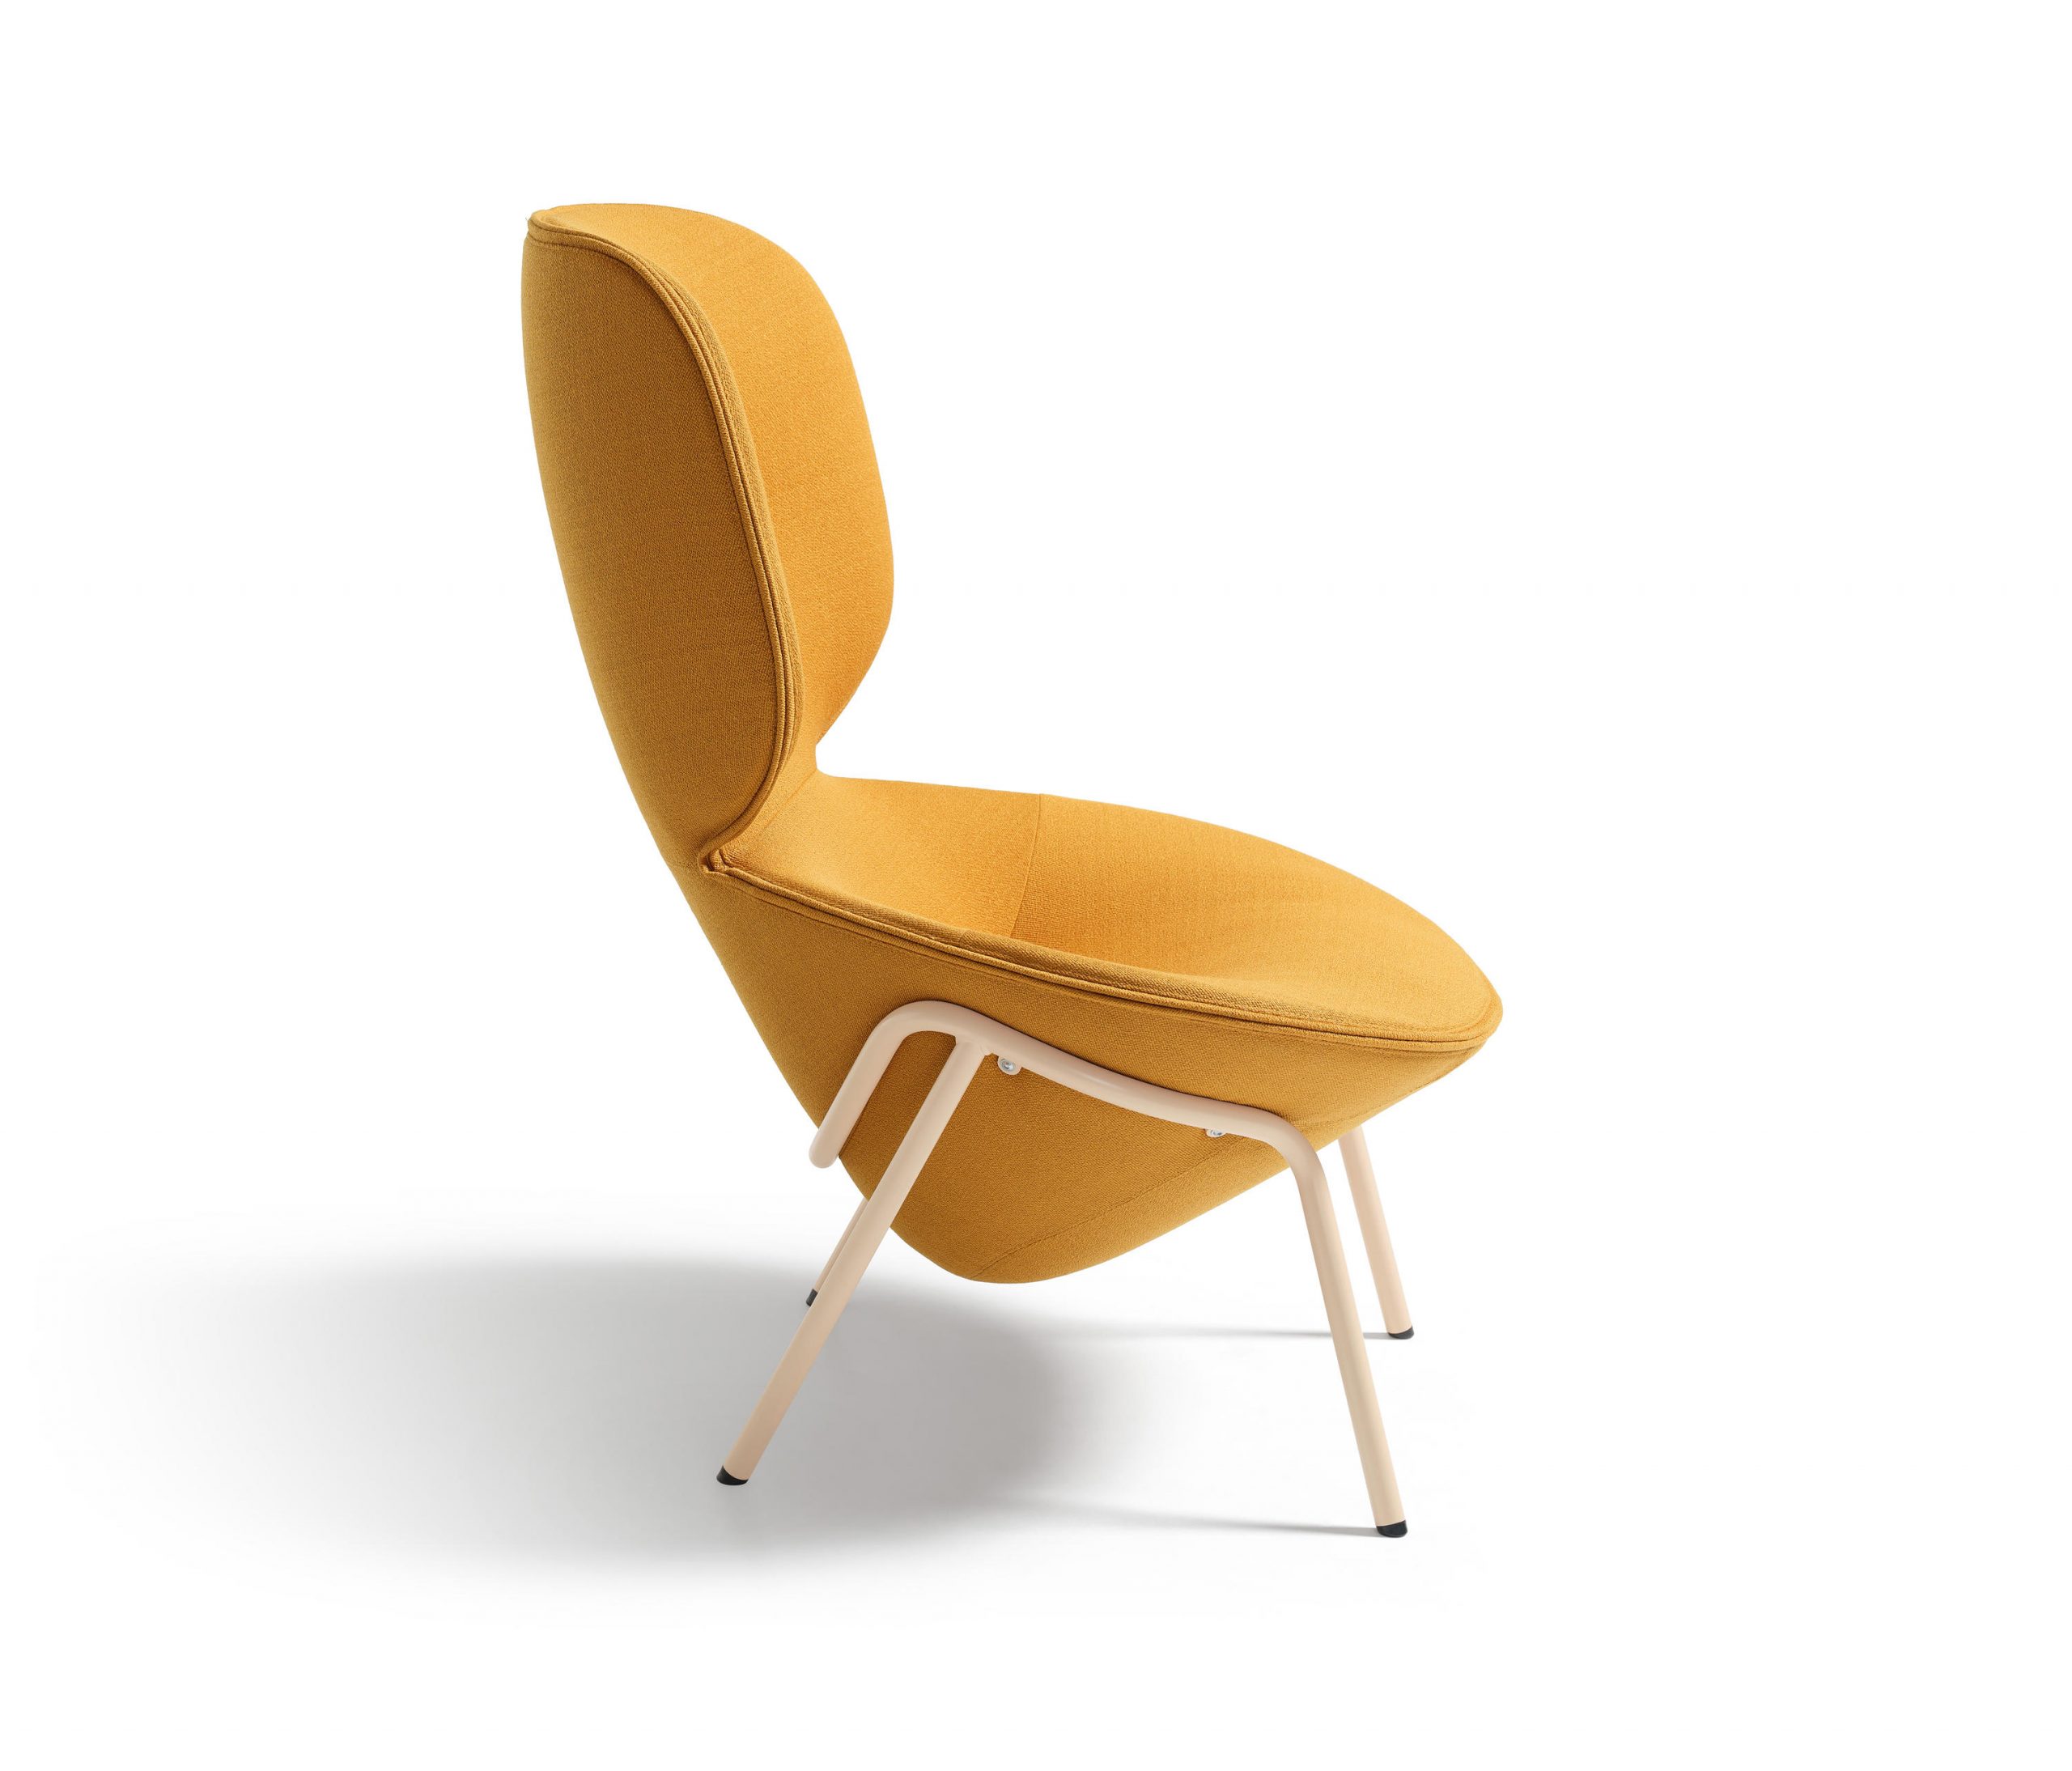 Moon Lounge Chair by Patrick Norguet for Artifort